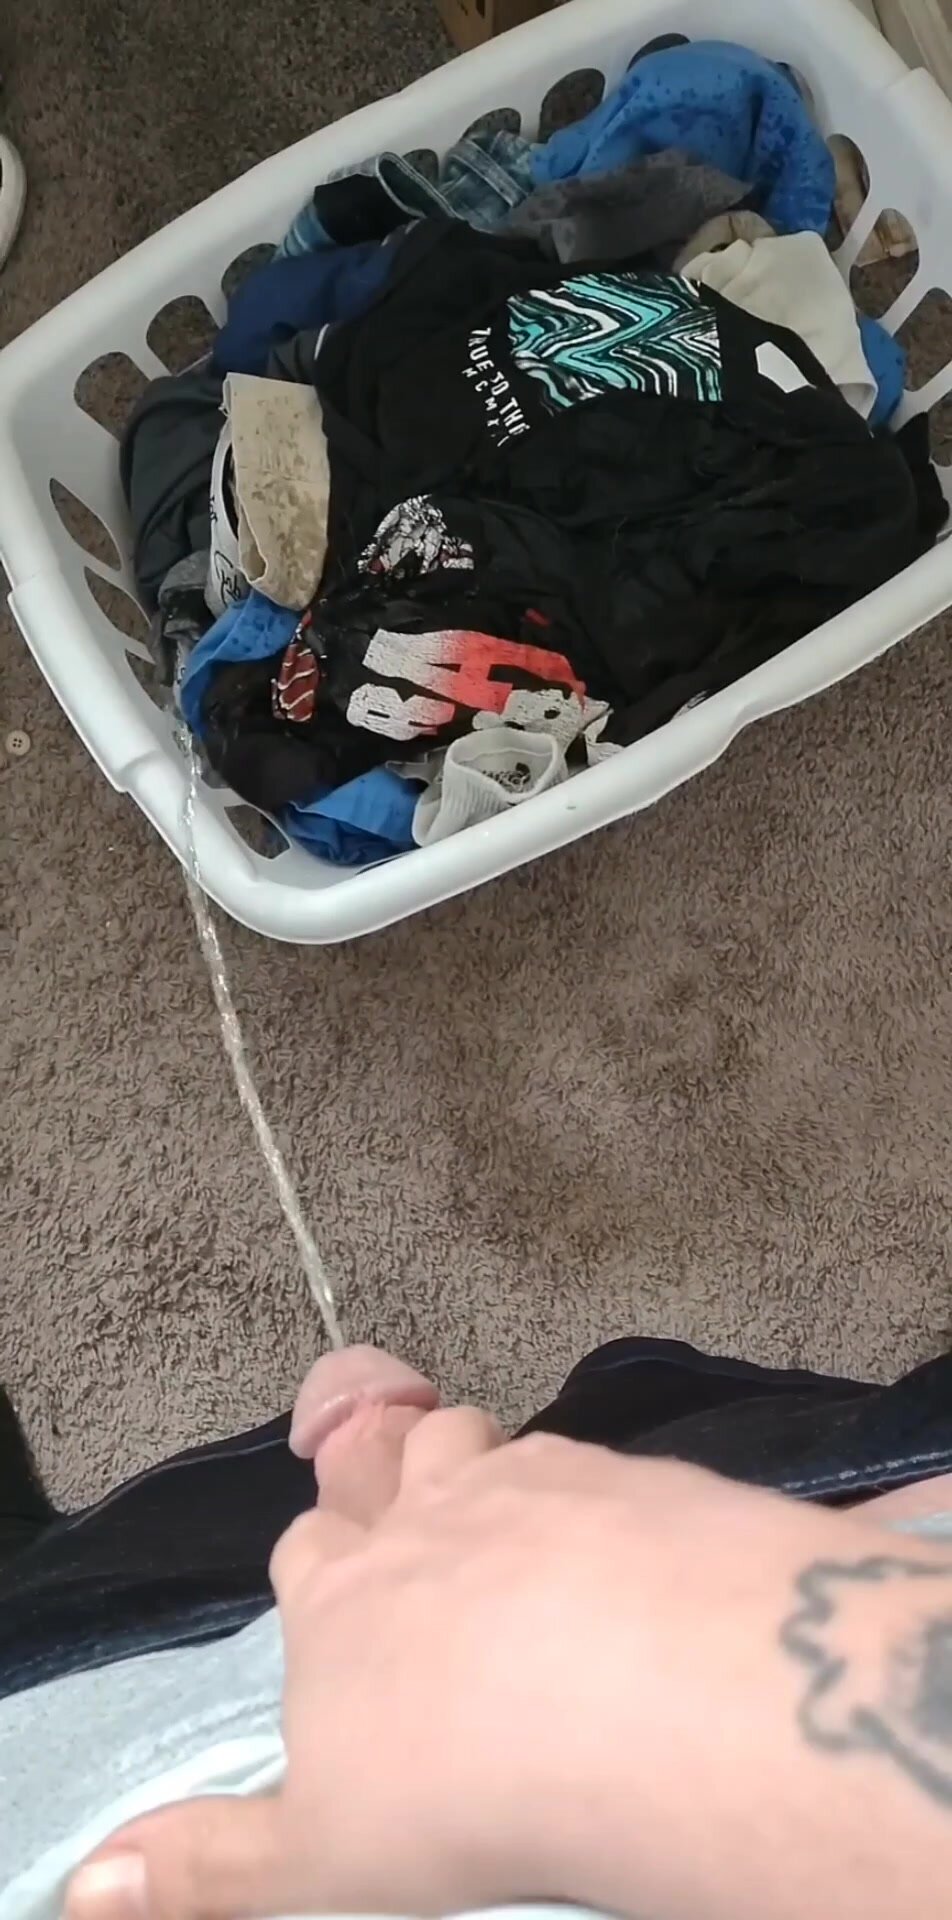 Pissing in laundry basket all day